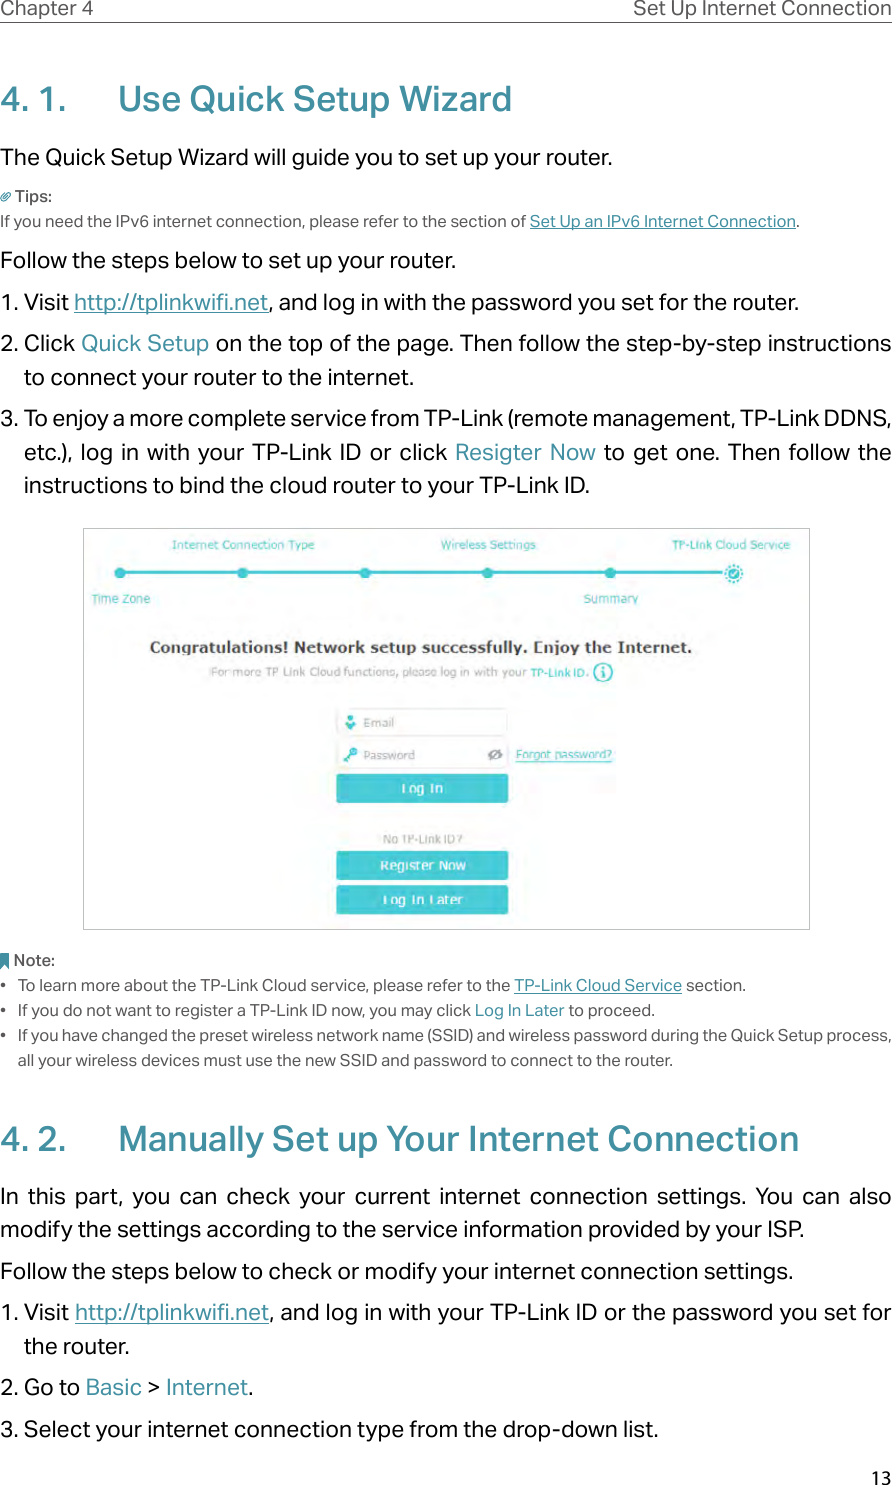 13Chapter 4 Set Up Internet Connection4. 1.  Use Quick Setup WizardThe Quick Setup Wizard will guide you to set up your router.Tips:If you need the IPv6 internet connection, please refer to the section of Set Up an IPv6 Internet Connection.Follow the steps below to set up your router.1. Visit http://tplinkwifi.net, and log in with the password you set for the router.2. Click Quick Setup on the top of the page. Then follow the step-by-step instructions to connect your router to the internet.3. To enjoy a more complete service from TP-Link (remote management, TP-Link DDNS, etc.), log in with your TP-Link ID or click Resigter Now to get one. Then follow the instructions to bind the cloud router to your TP-Link ID.Note:•  To learn more about the TP-Link Cloud service, please refer to the TP-Link Cloud Service section.•  If you do not want to register a TP-Link ID now, you may click Log In Later to proceed.•  If you have changed the preset wireless network name (SSID) and wireless password during the Quick Setup process, all your wireless devices must use the new SSID and password to connect to the router.4. 2.  Manually Set up Your Internet Connection In this part, you can check your current internet connection settings. You can also modify the settings according to the service information provided by your ISP.Follow the steps below to check or modify your internet connection settings.1. Visit http://tplinkwifi.net, and log in with your TP-Link ID or the password you set for the router.2. Go to Basic &gt; Internet.3. Select your internet connection type from the drop-down list. 